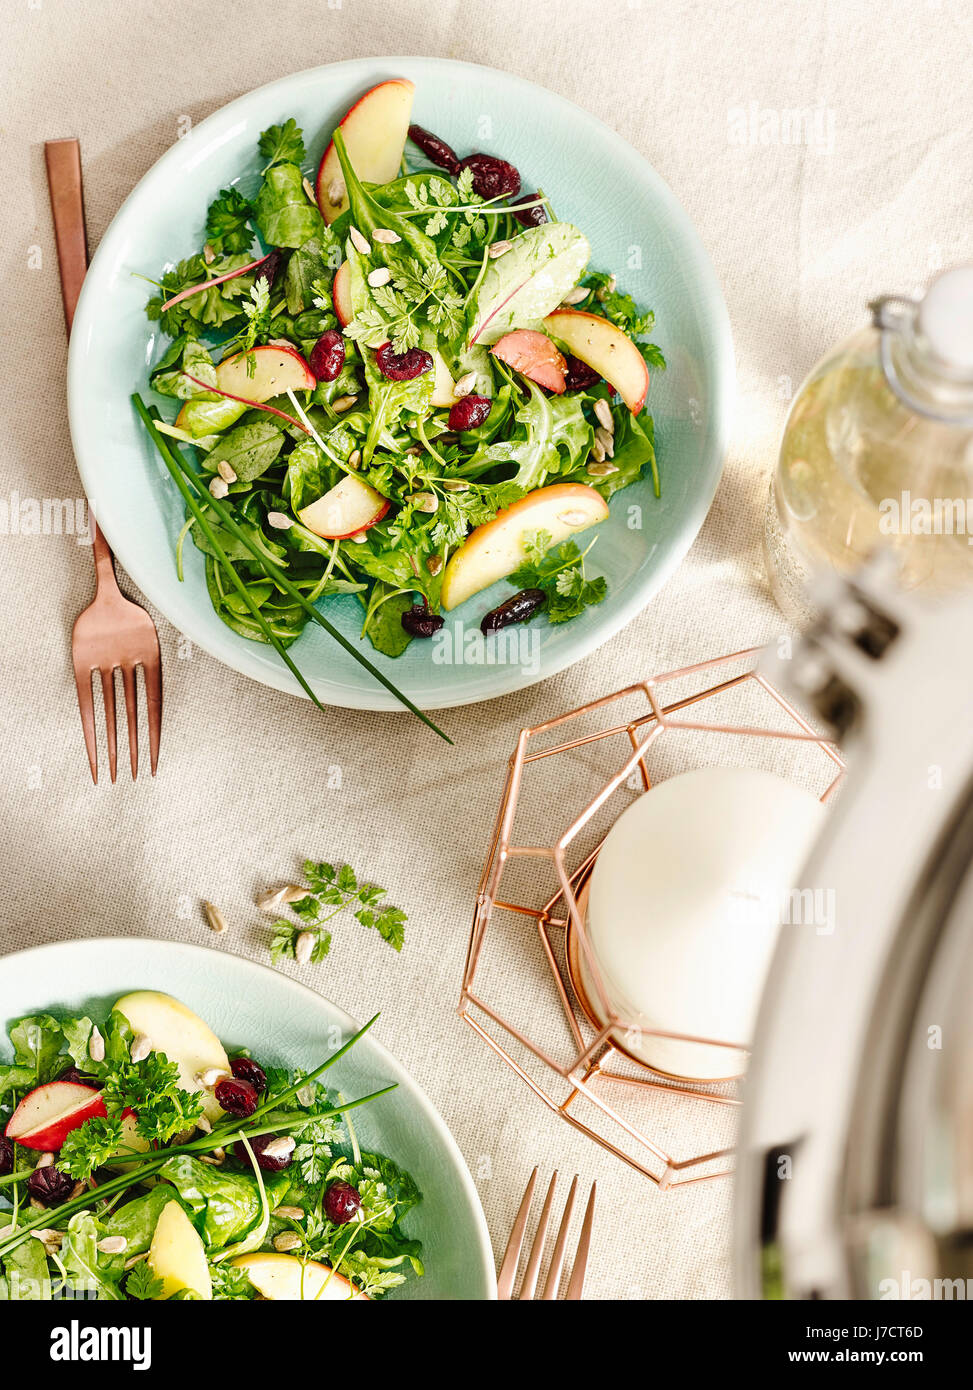 Herbel salad with lime dressing Stock Photo